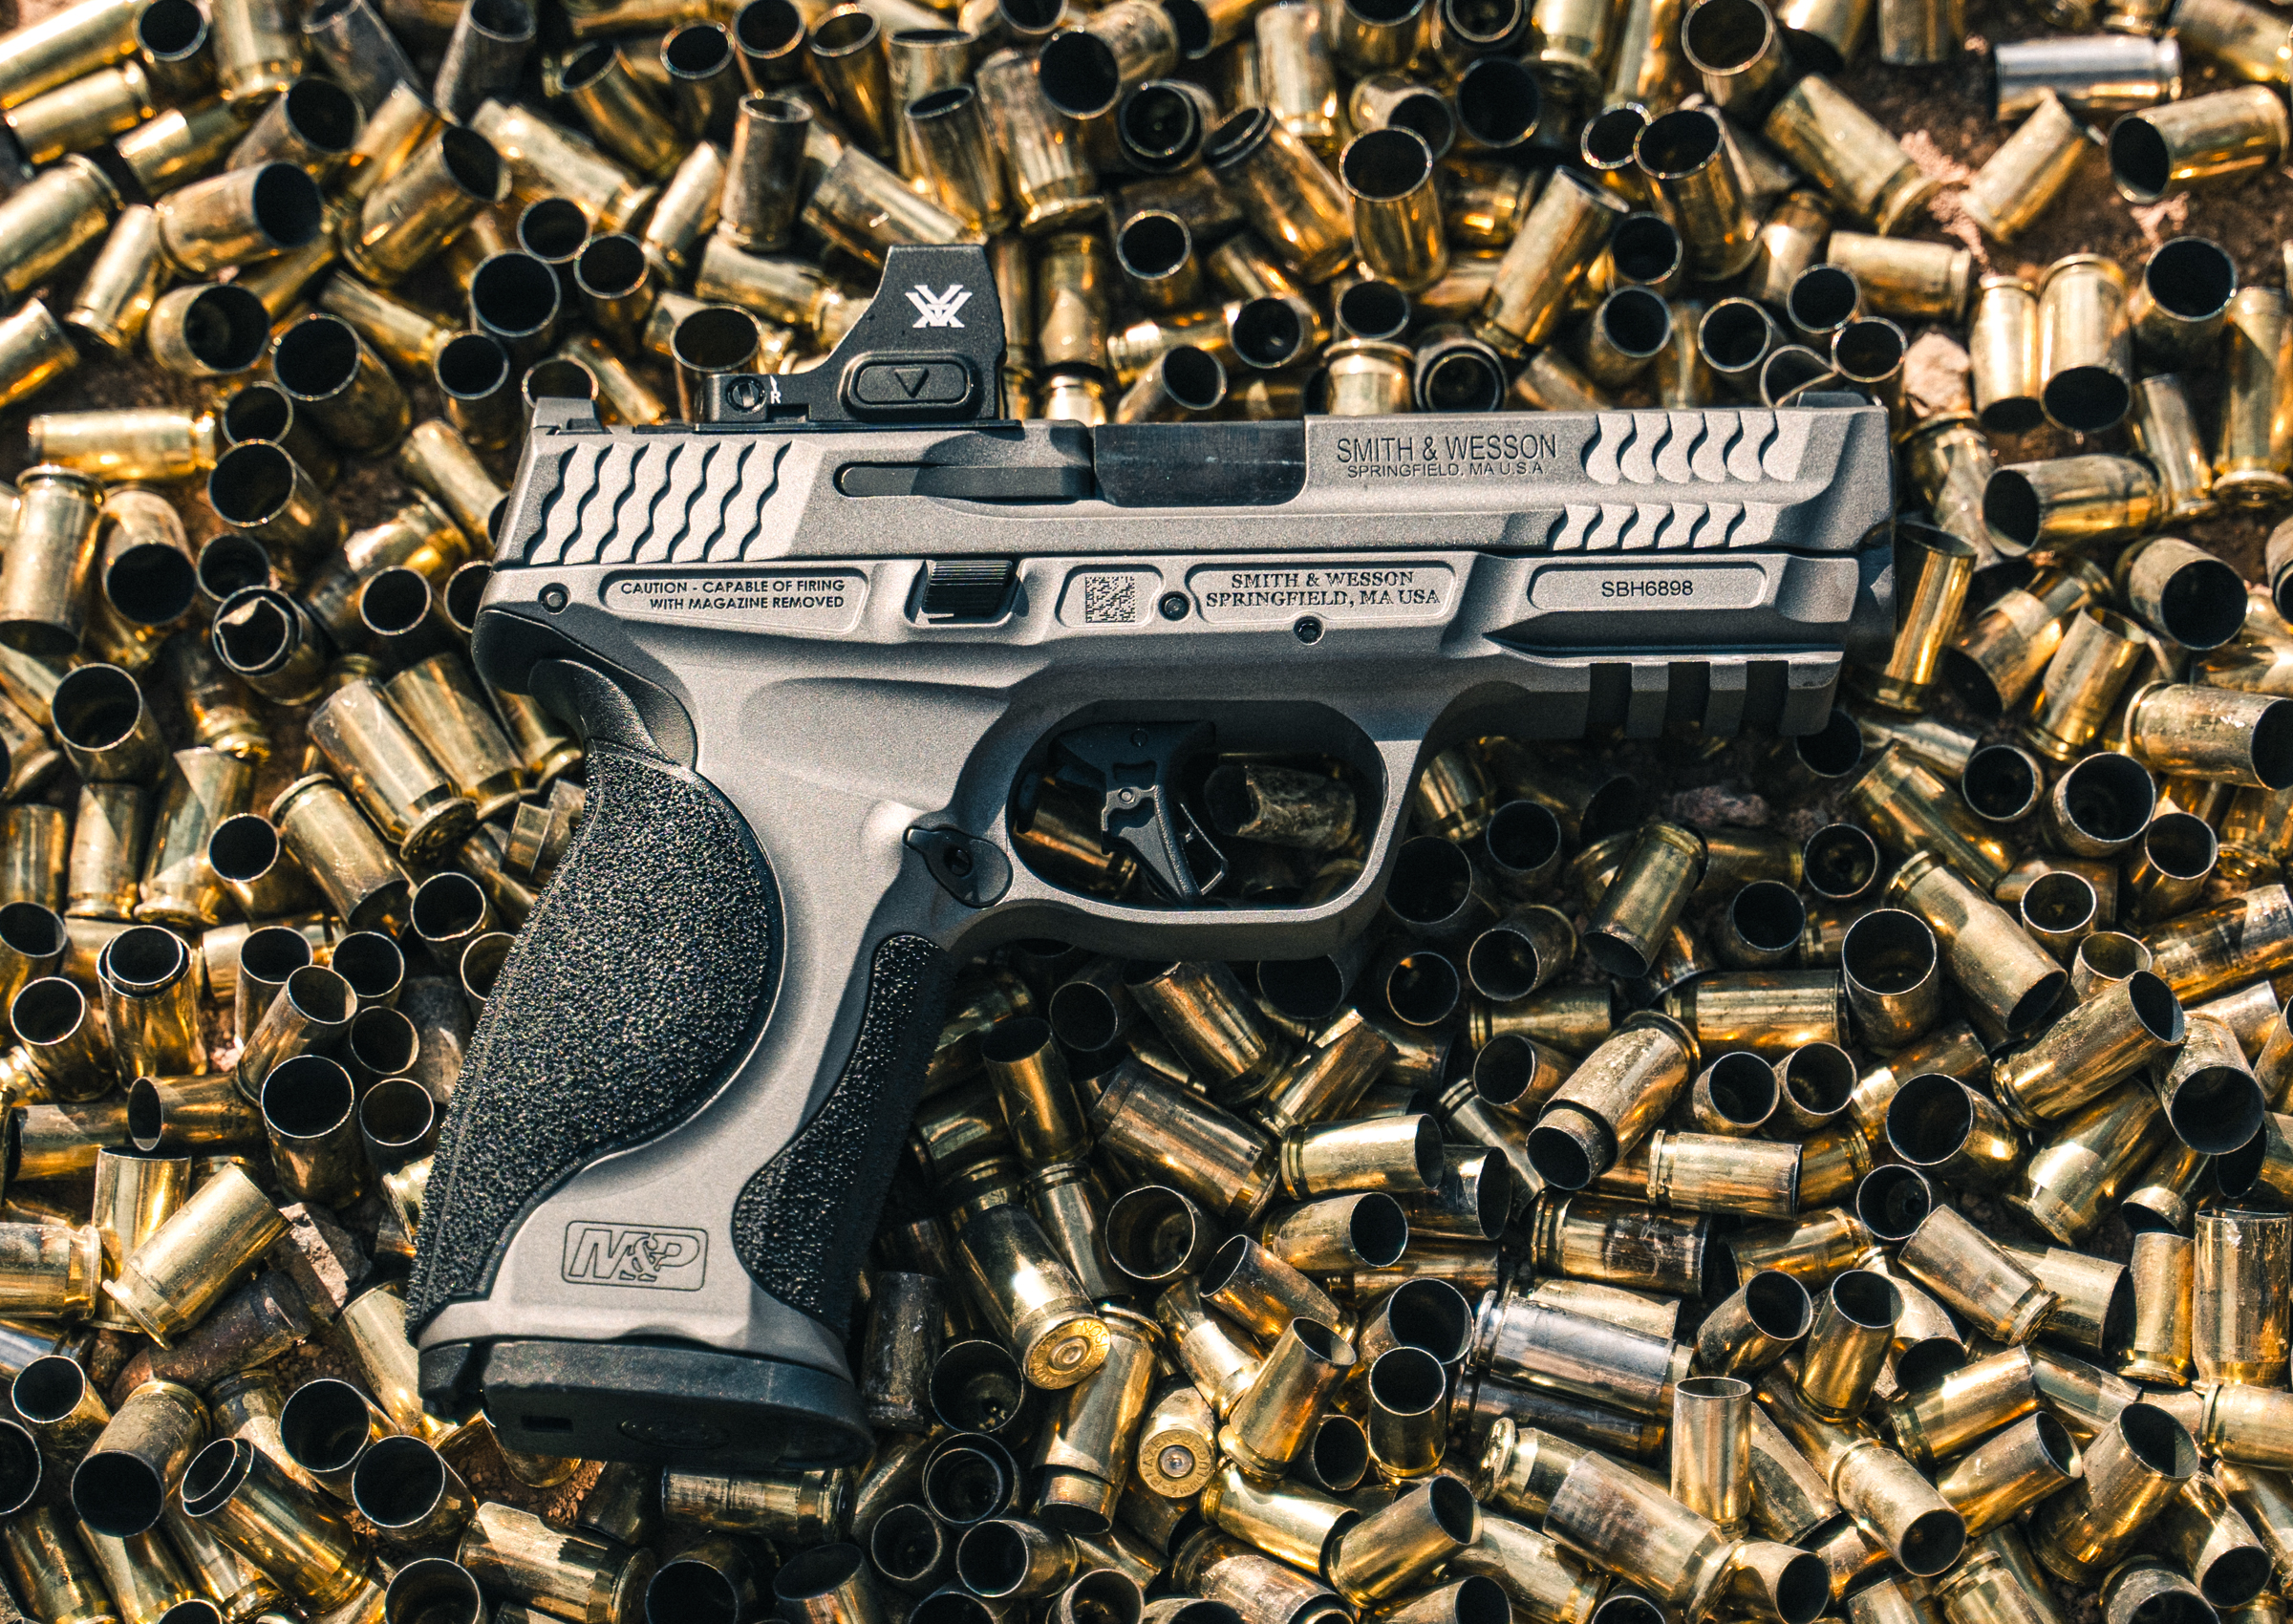 The Smith and Wesson M&P 2.0 Metal